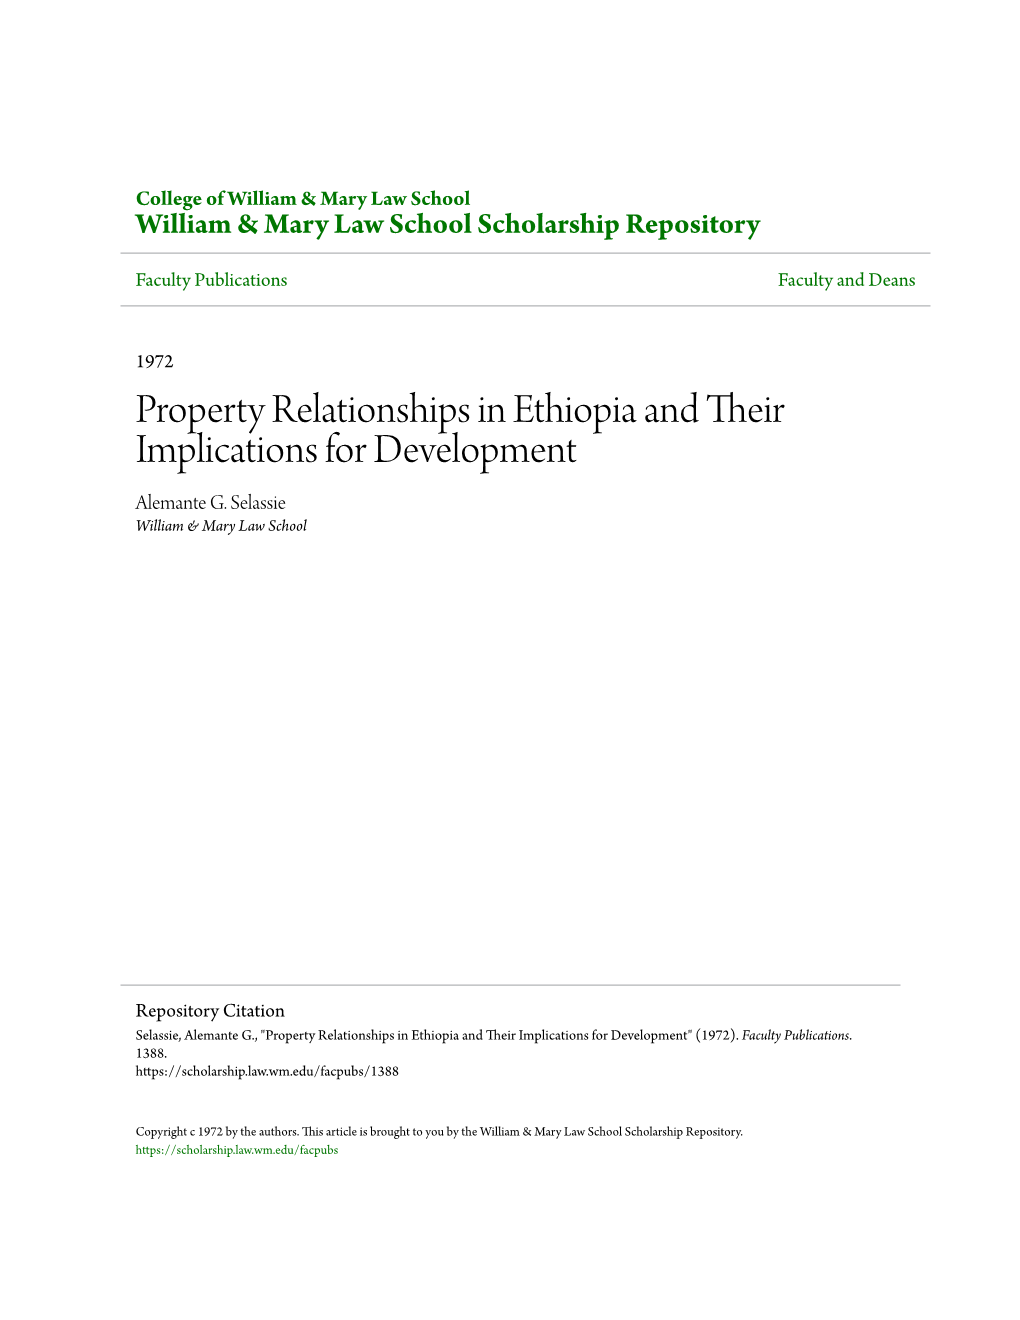 Property Relationships in Ethiopia and Their Implications for Development Alemante G